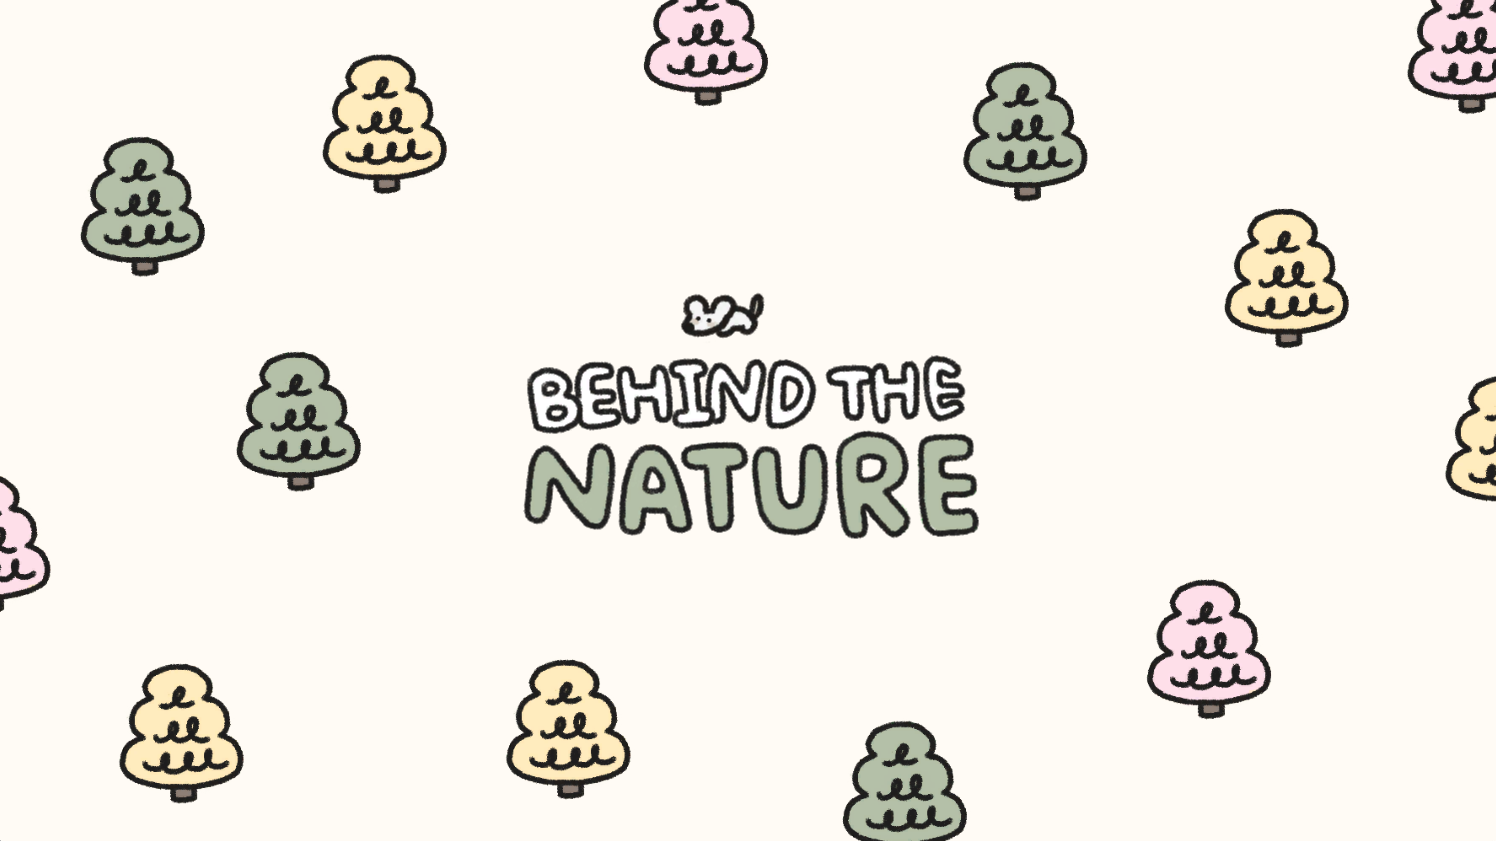 Behind the nature